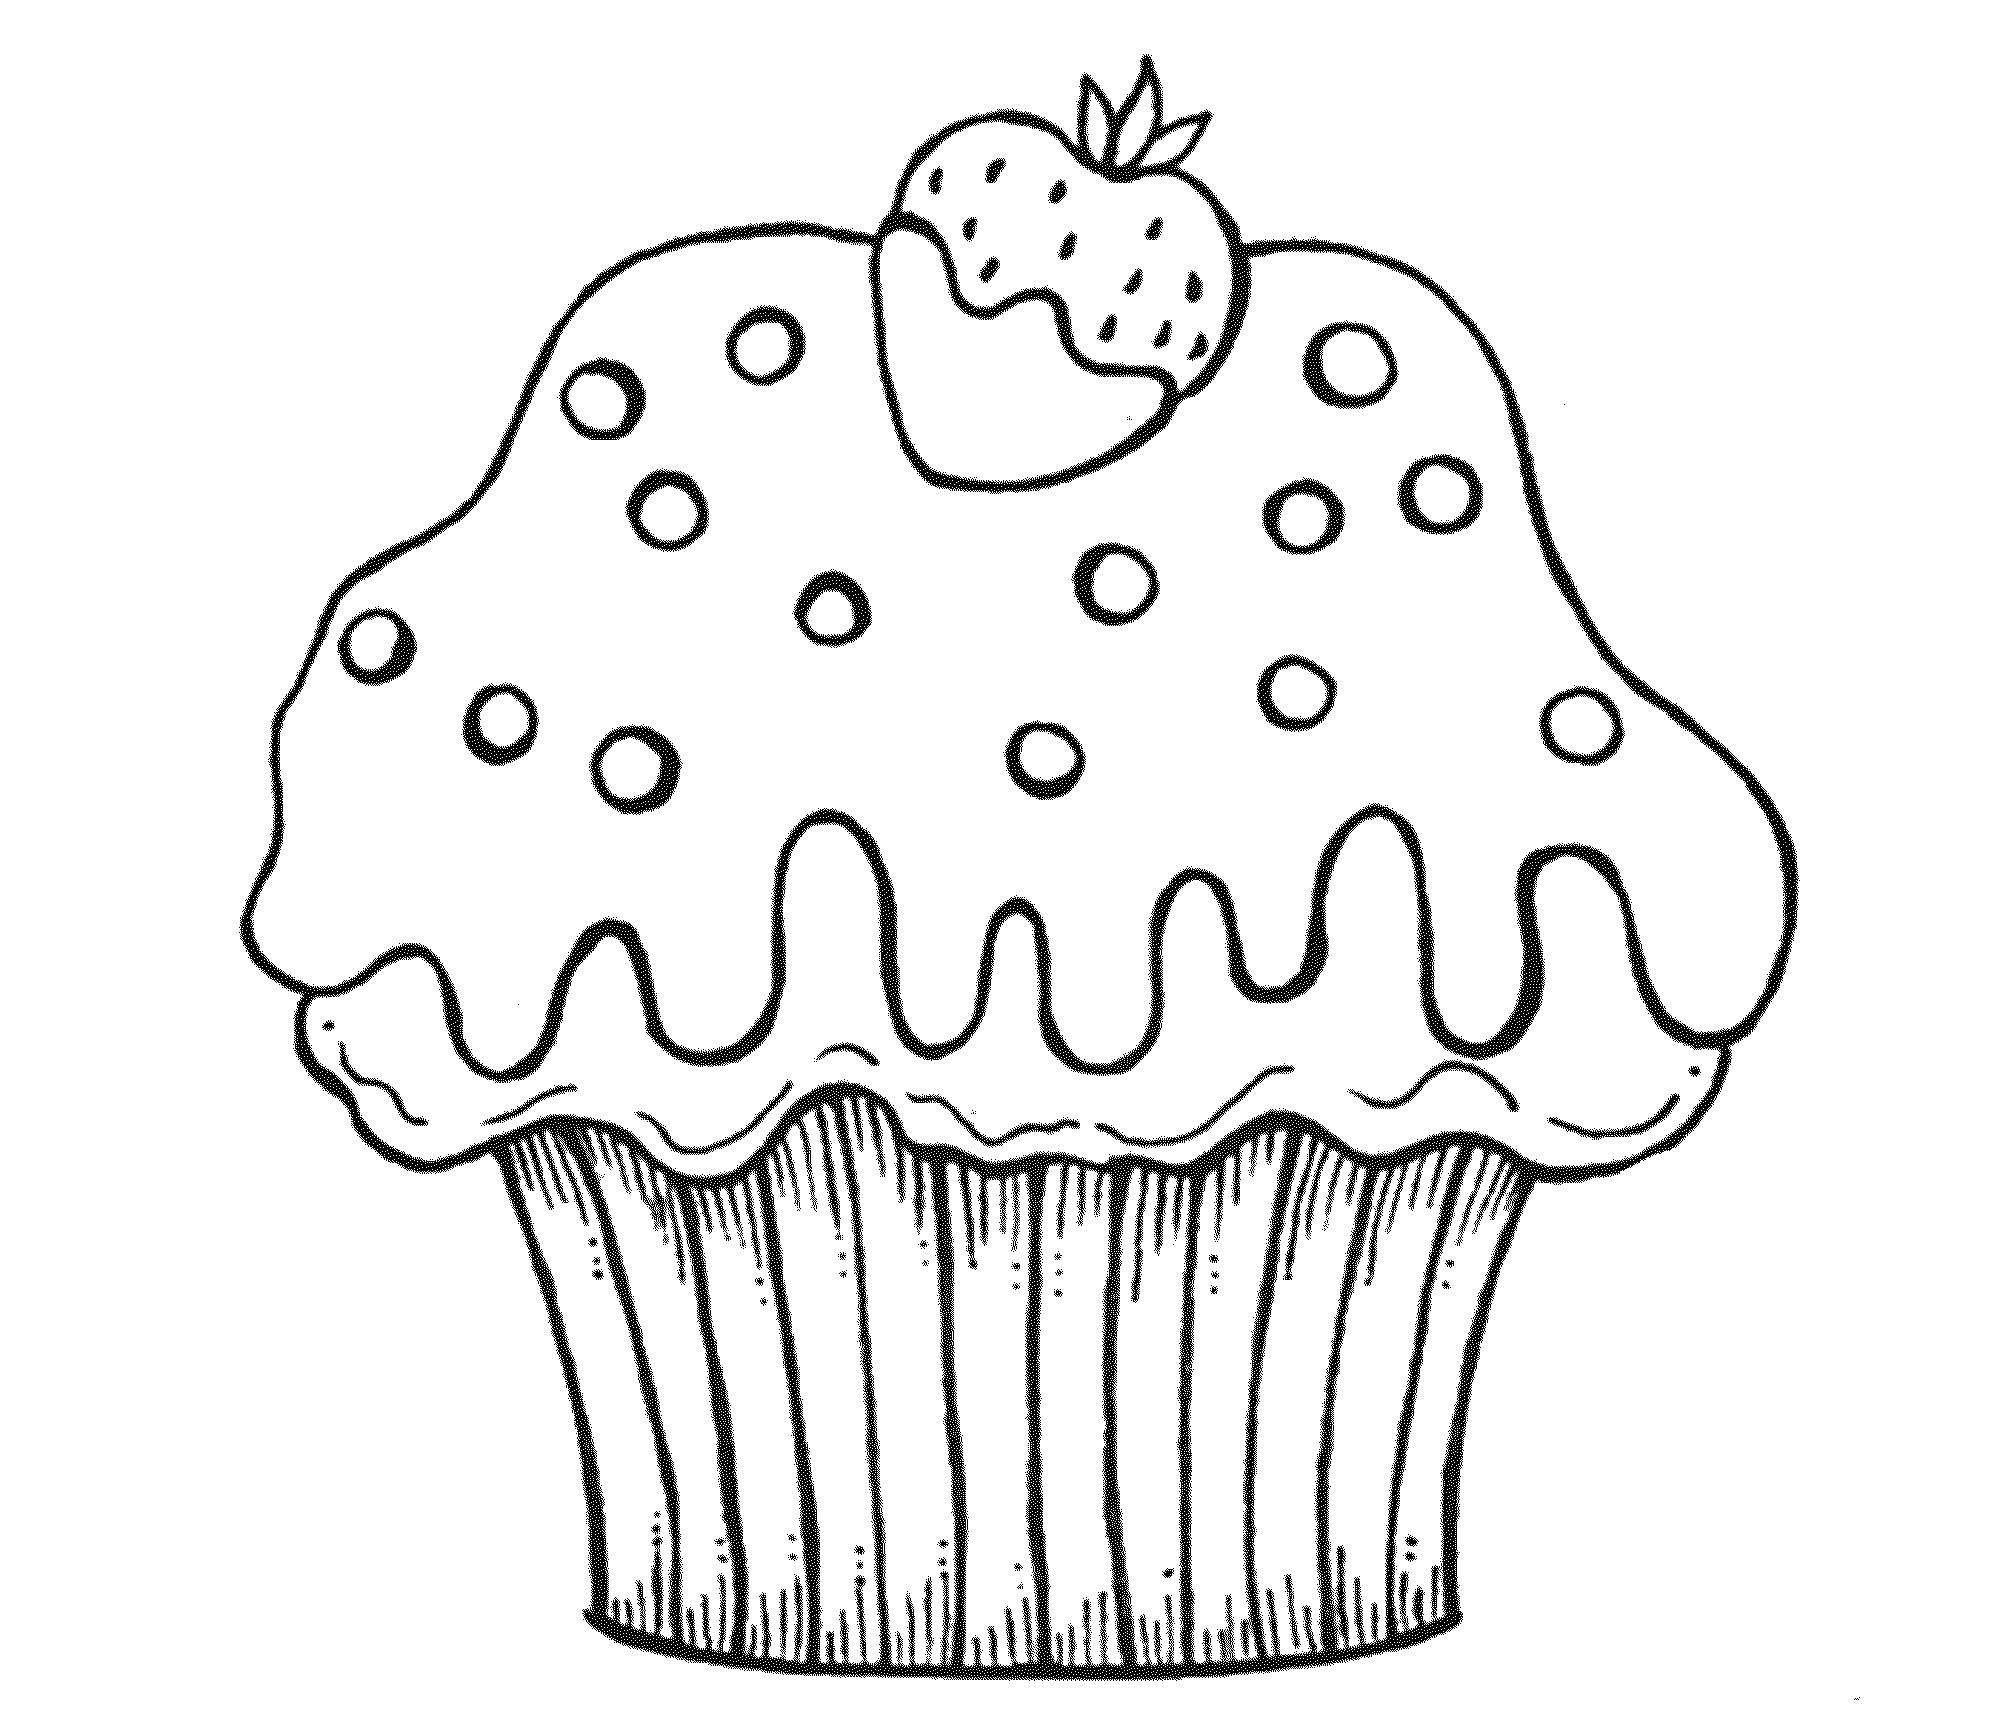 Baked Goods Coloring Pages at GetColorings.com | Free printable